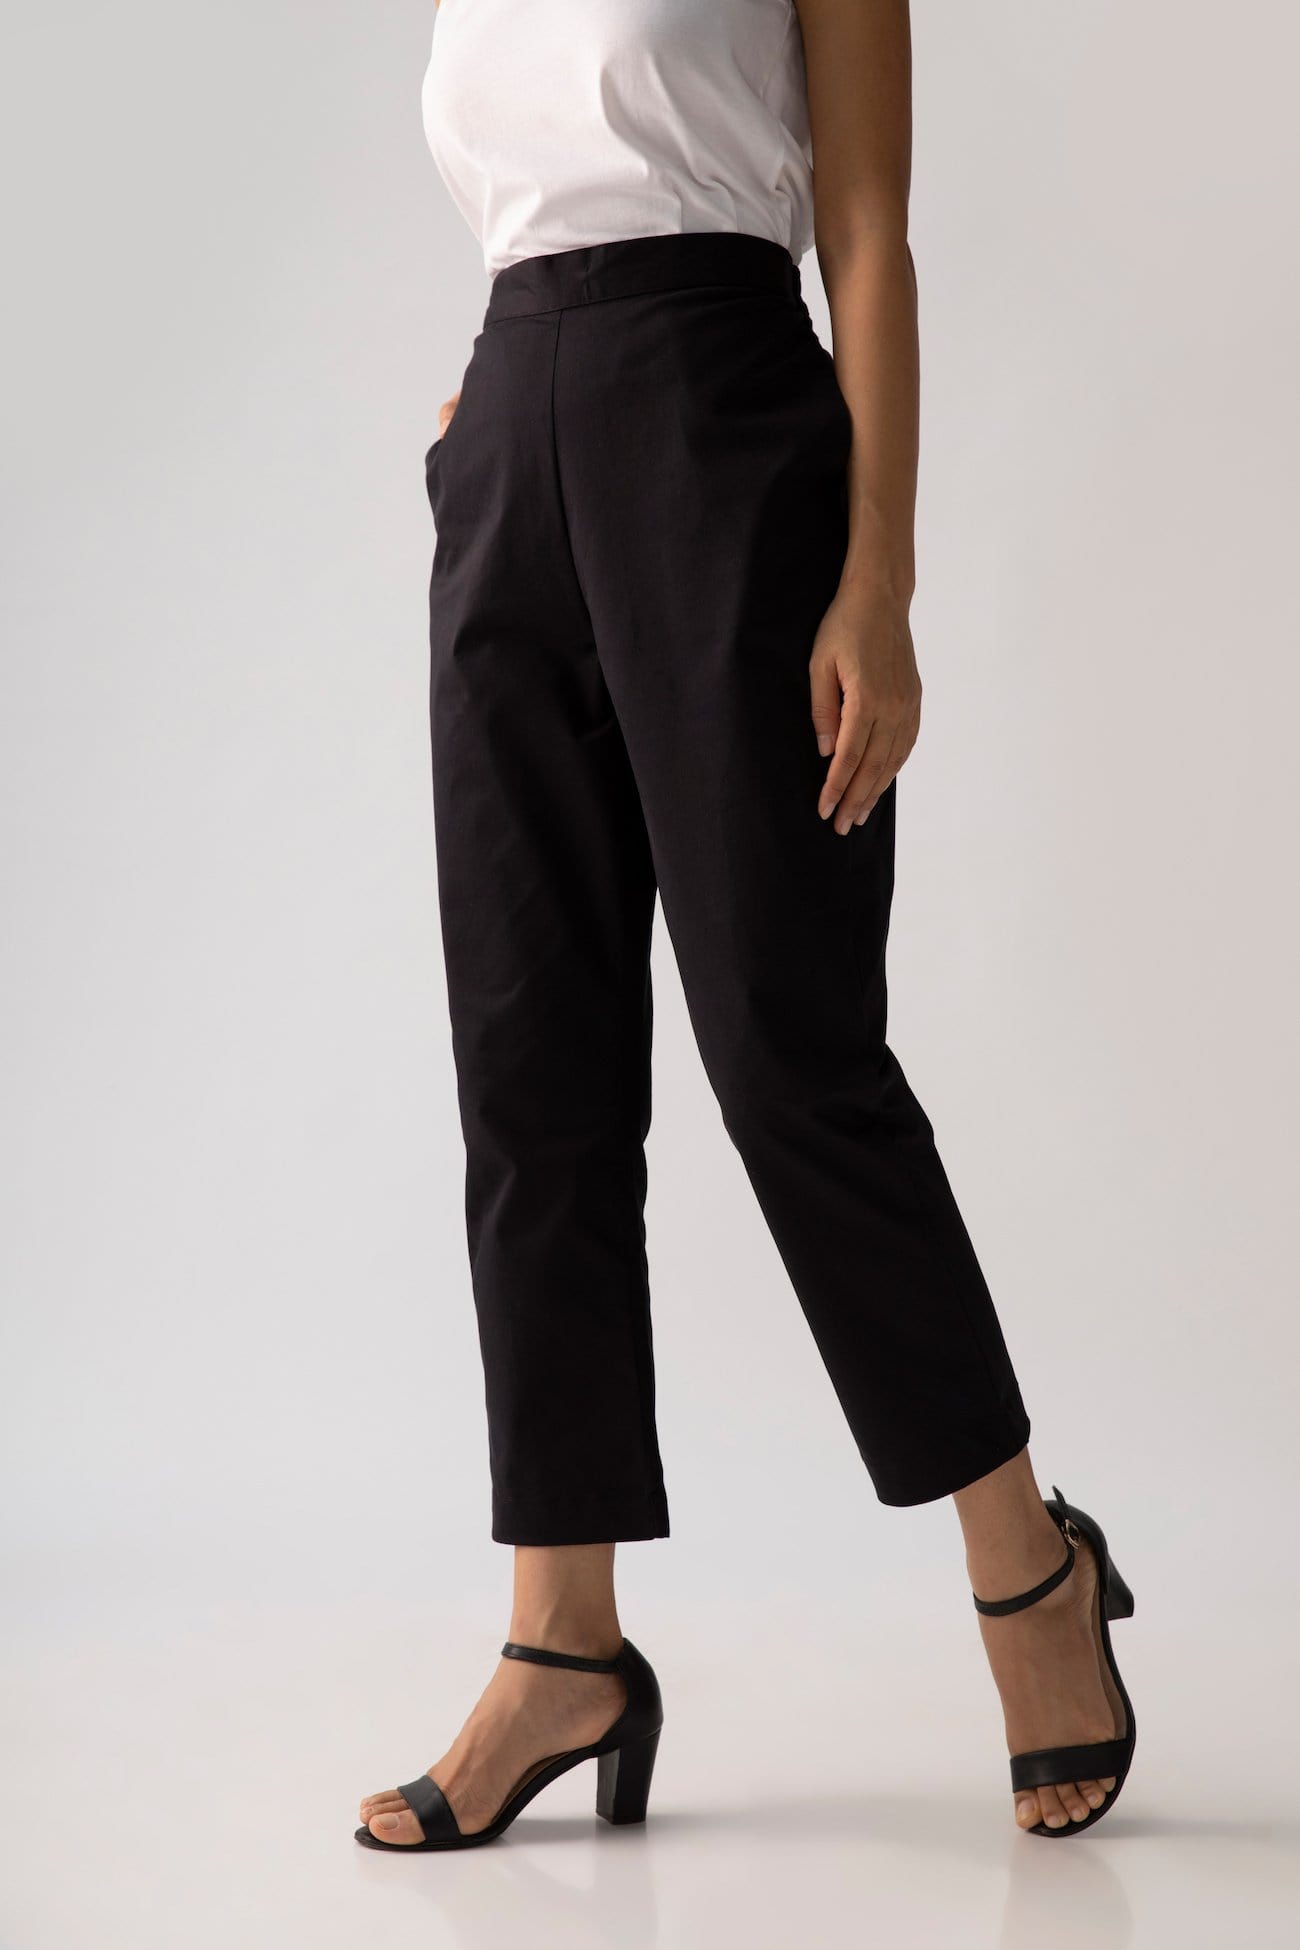 Saltpetre womens casual and formal wear pants, in black, 100% organic cotton fabric, indo-western wear in ankle length pants and deep pockets